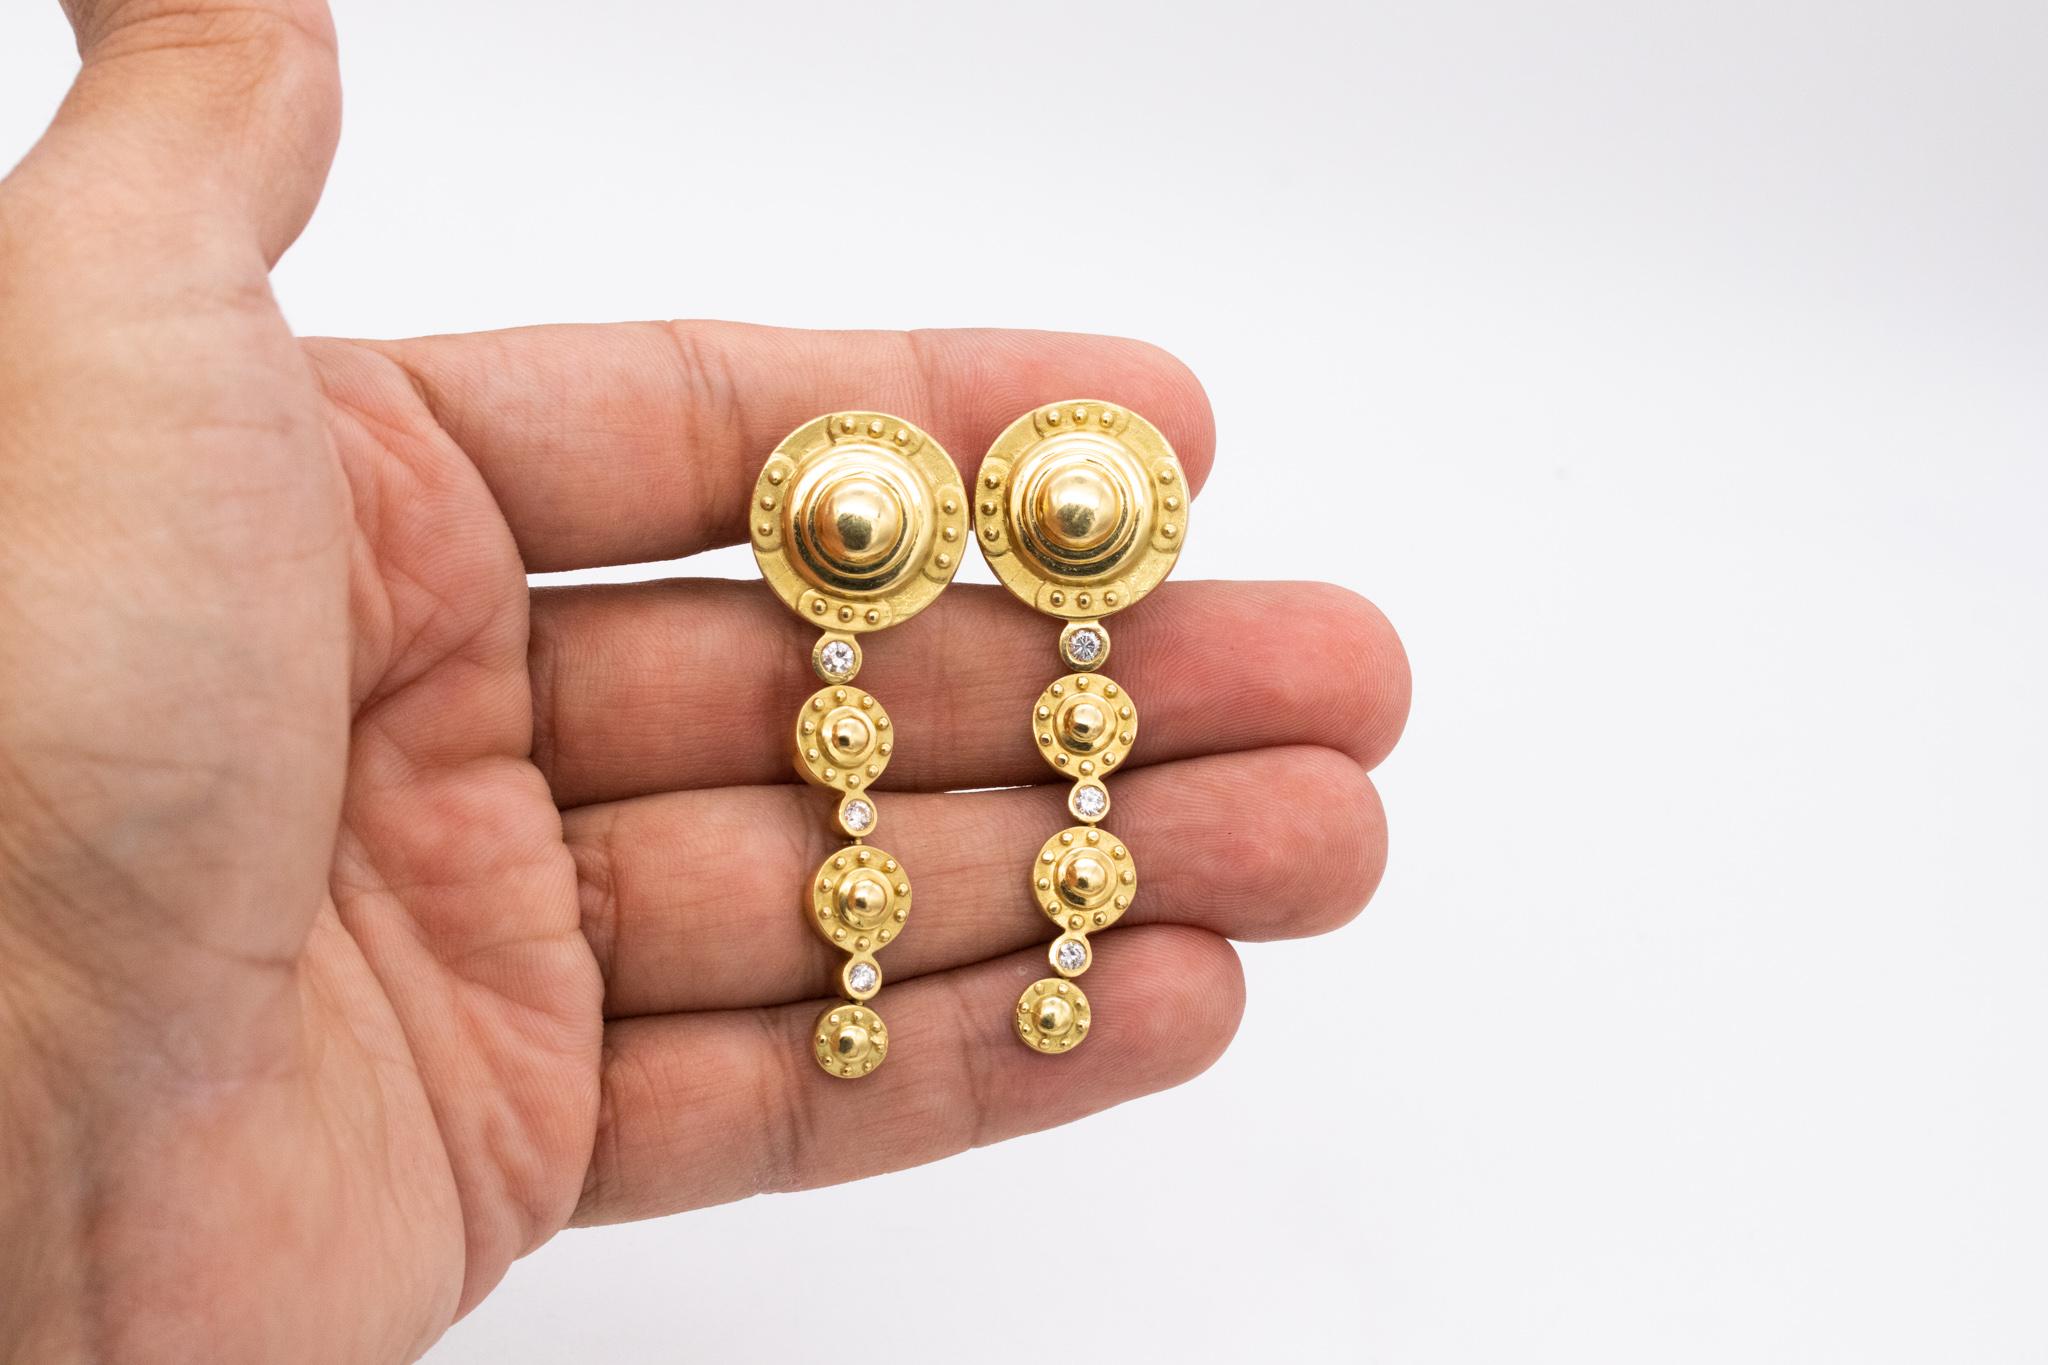 Elegant pair of drop earrings designed by Seidengang.

A vintage early pair, made by the jewelry designer's SeidenGang. These drop earrings are part of the Etruscan revival collection, carefully crafted in solid rich yellow gold of 18 karats, with